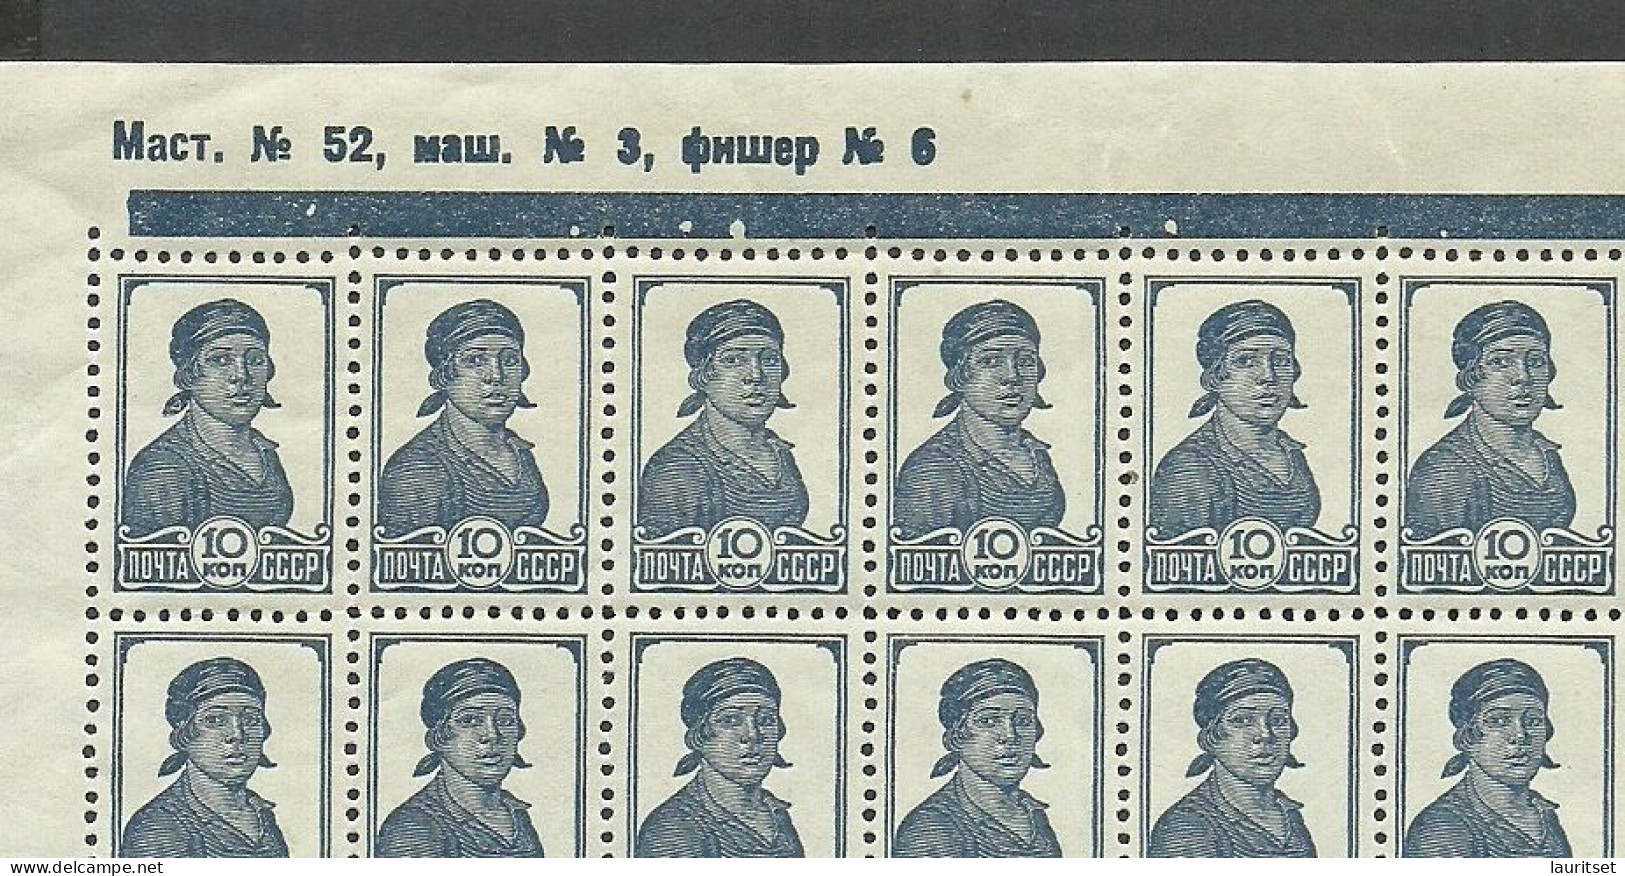 RUSSLAND RUSSIA 1937 Michel 677 I A Complete Sheet Of 100 Minus 3 Stamps MNH - Neufs